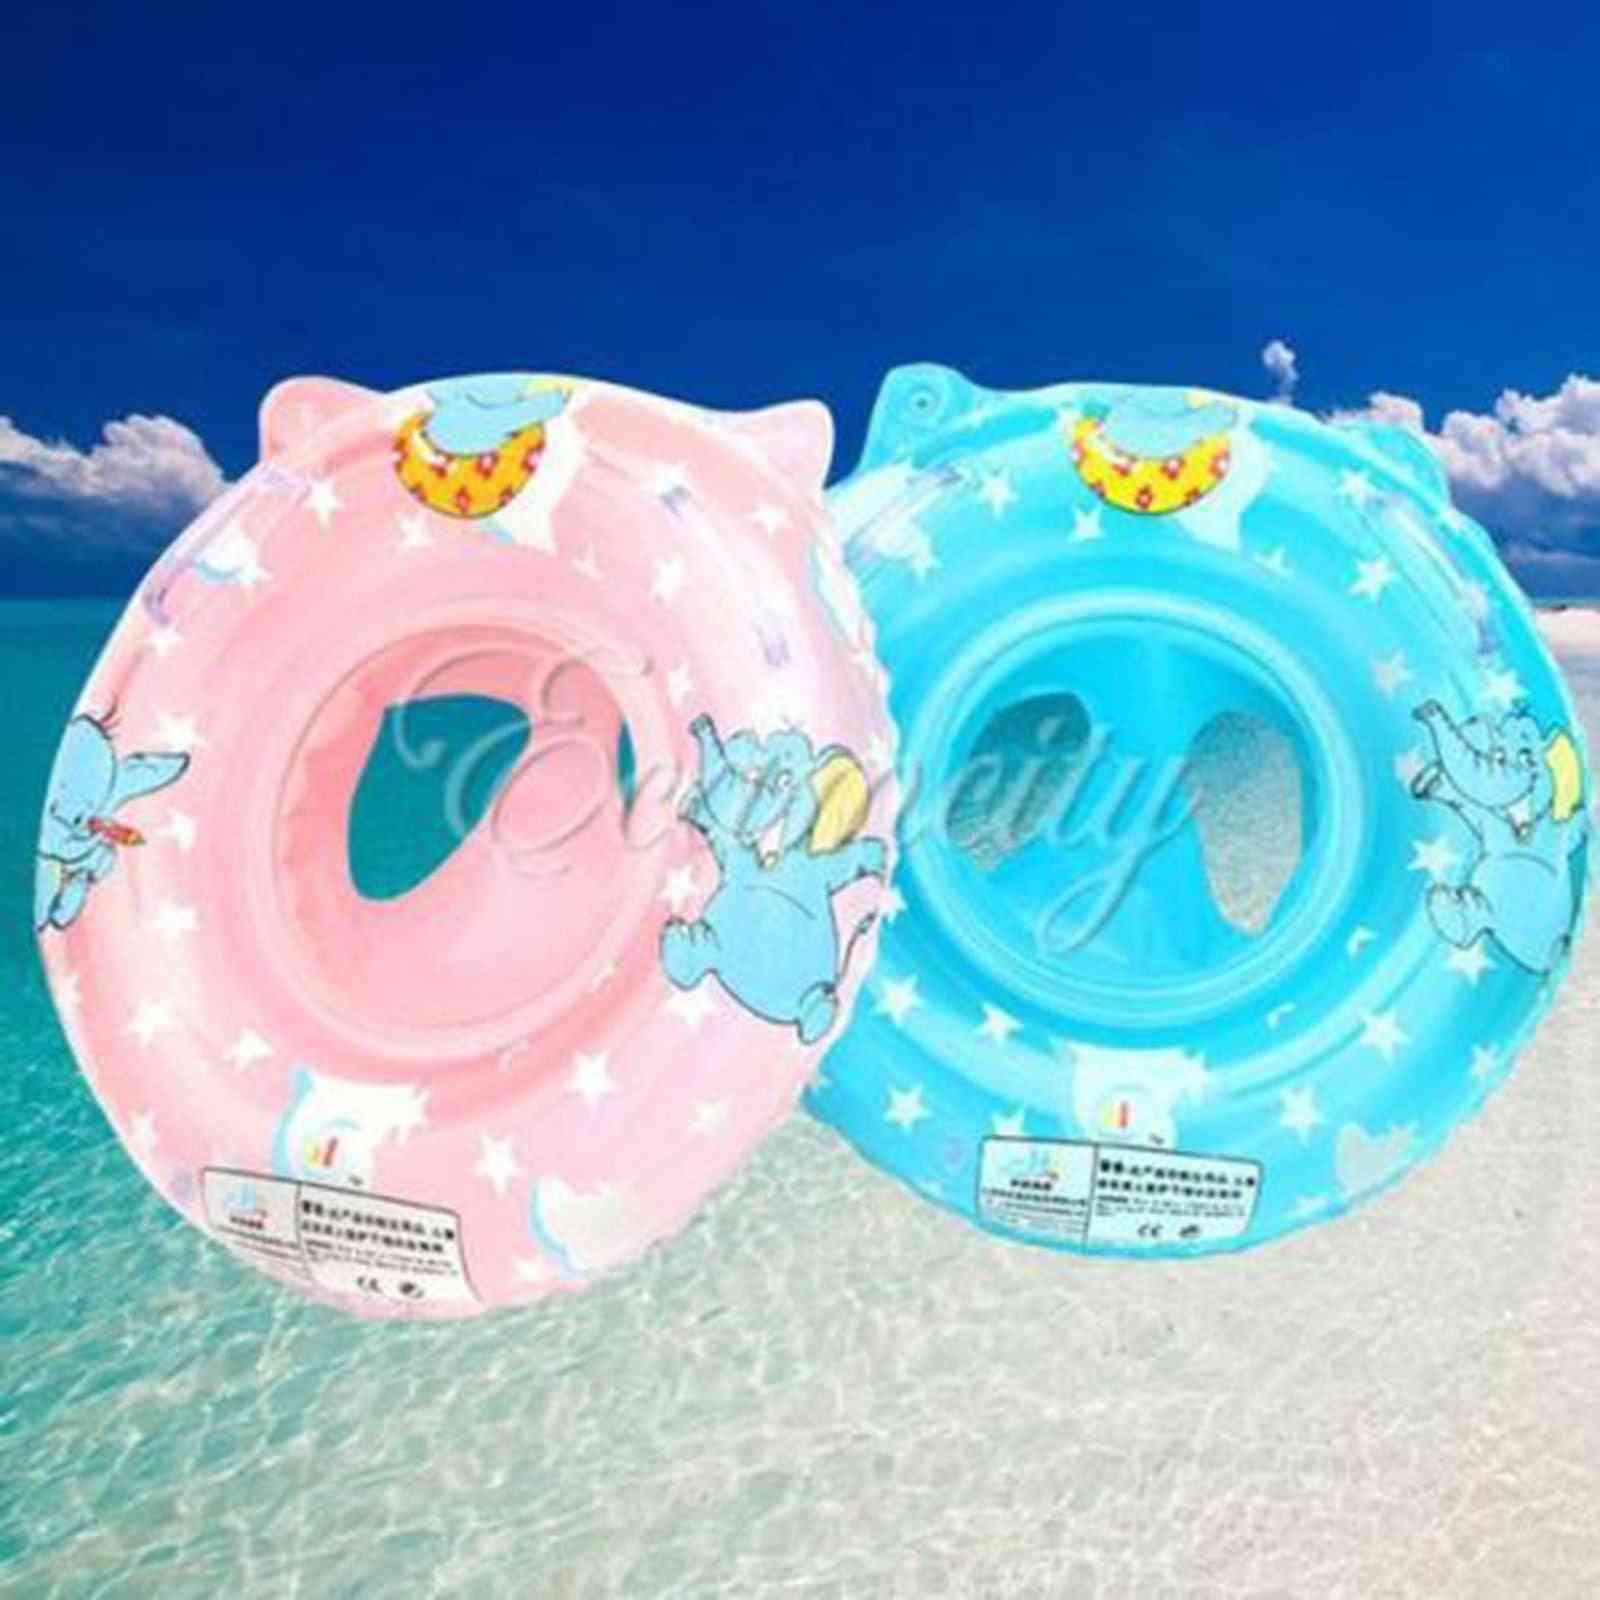 Inflatable Pool Water Swimming Toddler Safety Aid Float Seat Ring